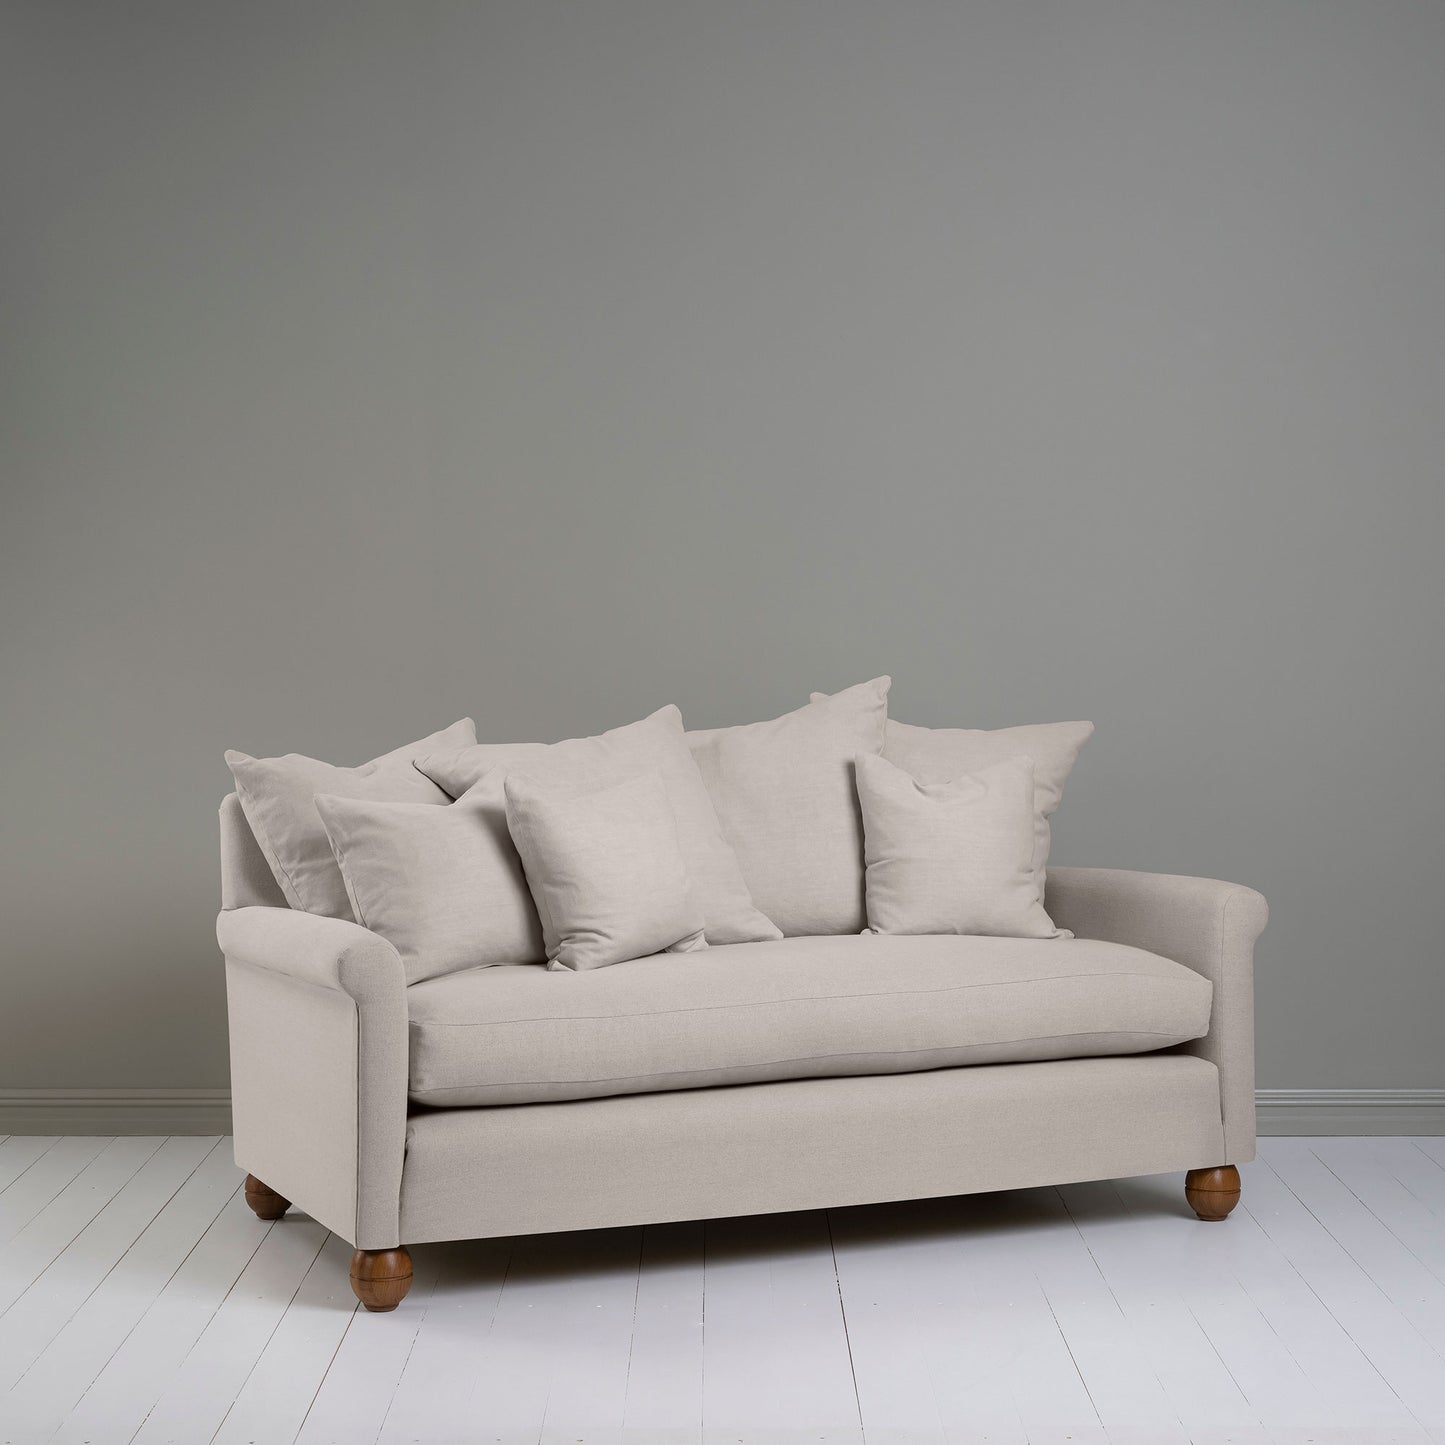 Idler 3 Seater Sofa in Laidback Linen Pearl Grey